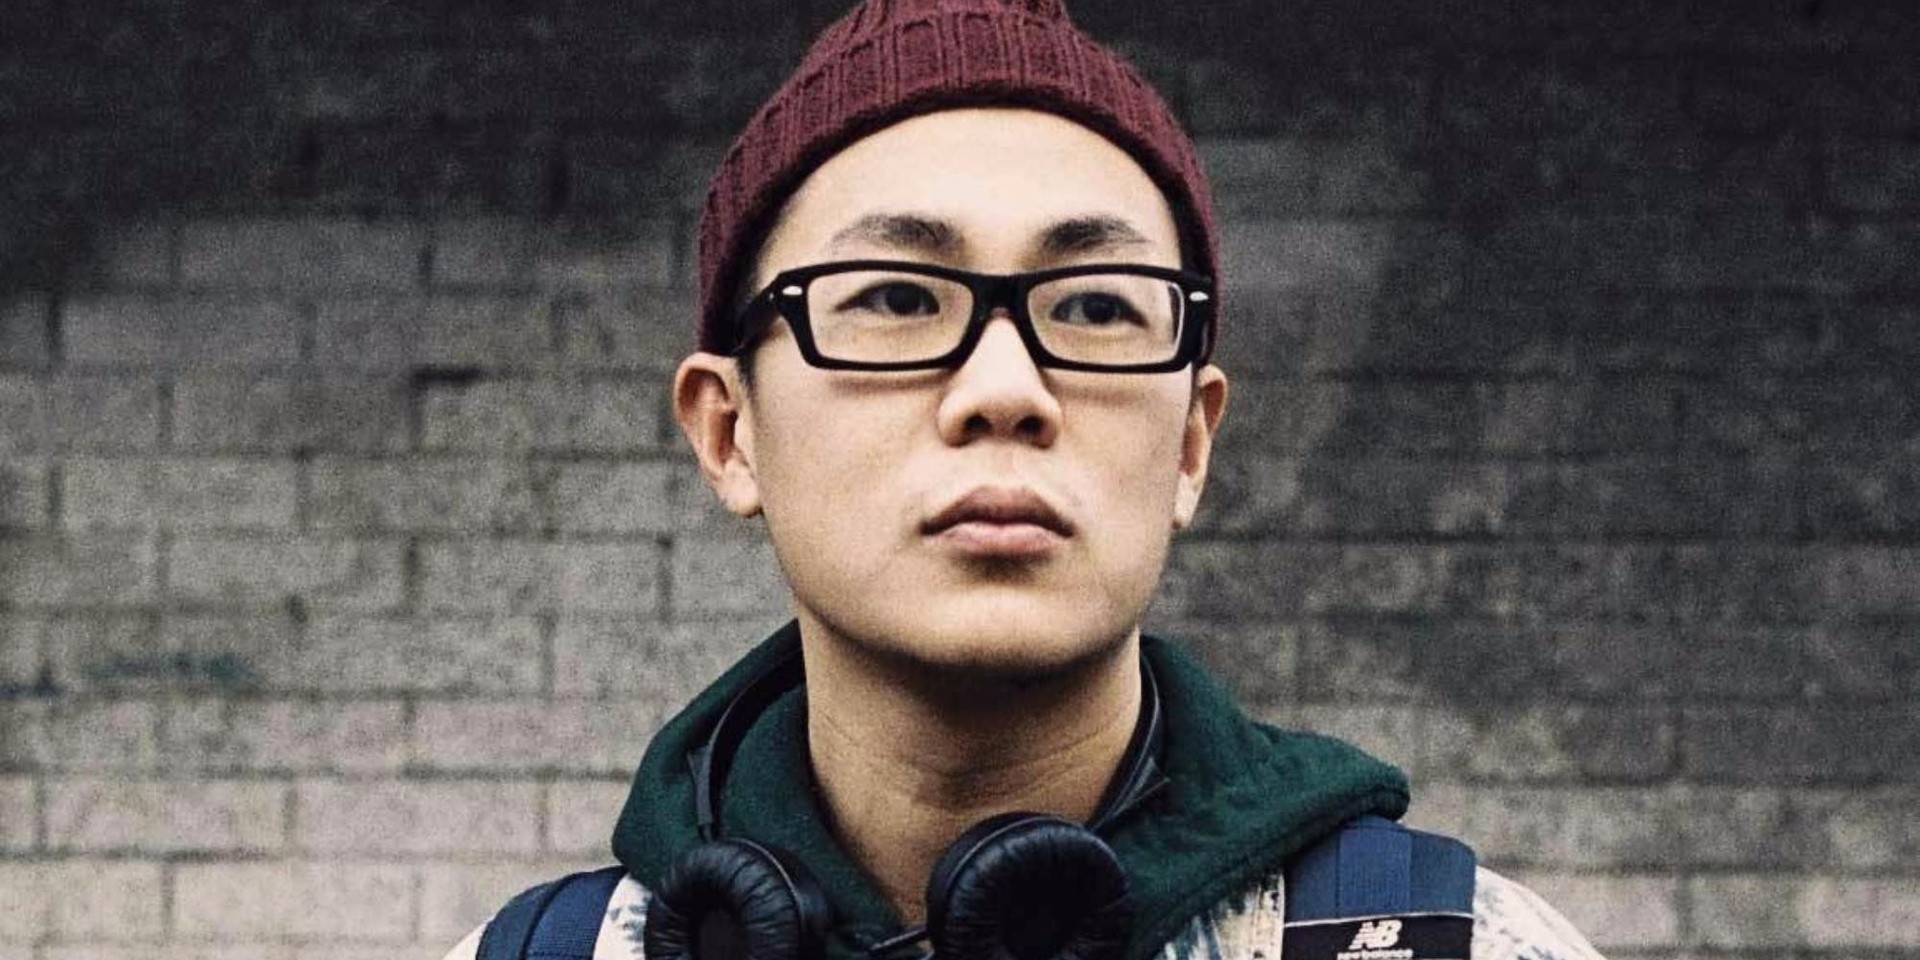 Introducing: The fresh, Sinocentric beats of Howie Lee